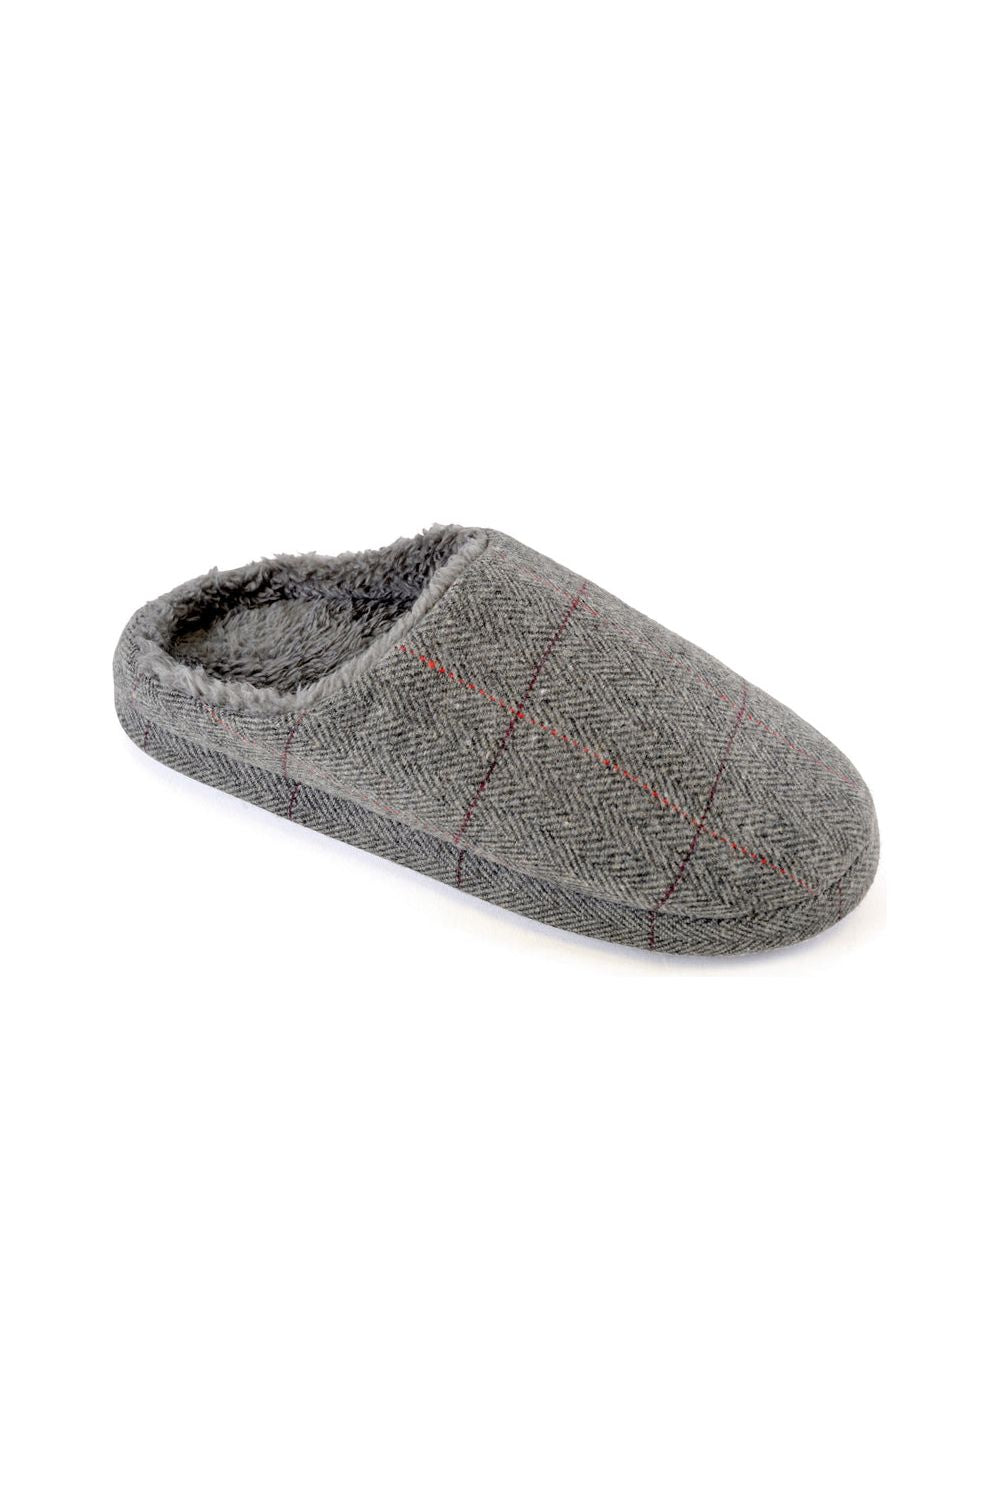 Mens Slip On Grey And Red Check Slippers